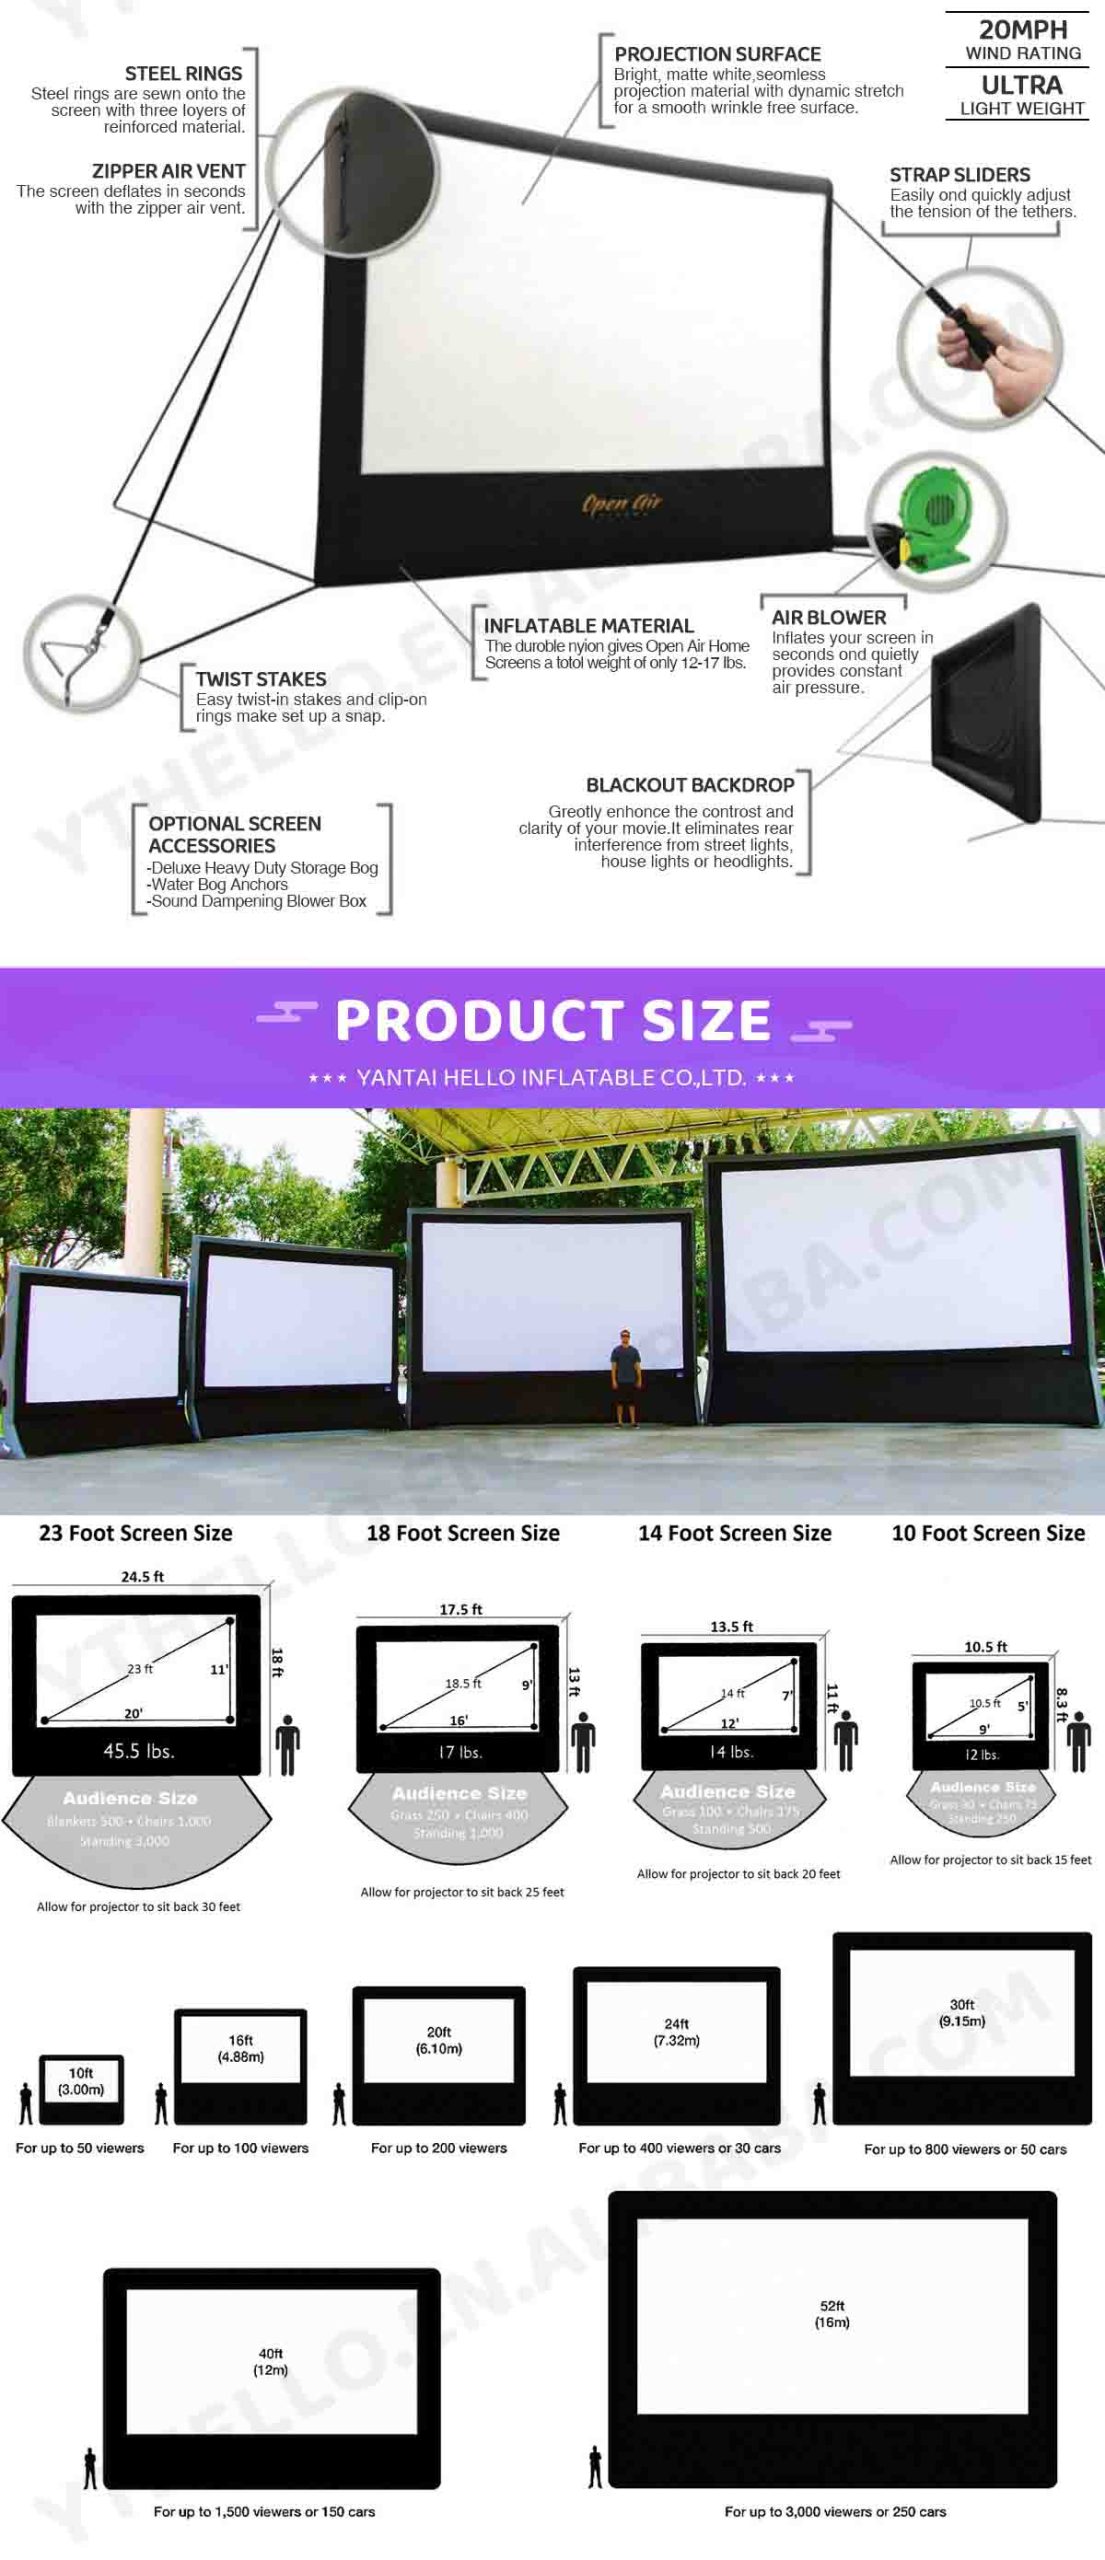 Outdoor Giant Inflatable Screen To Watch TV Inflatable Led Screen Hire An Inflatable Screen插图2